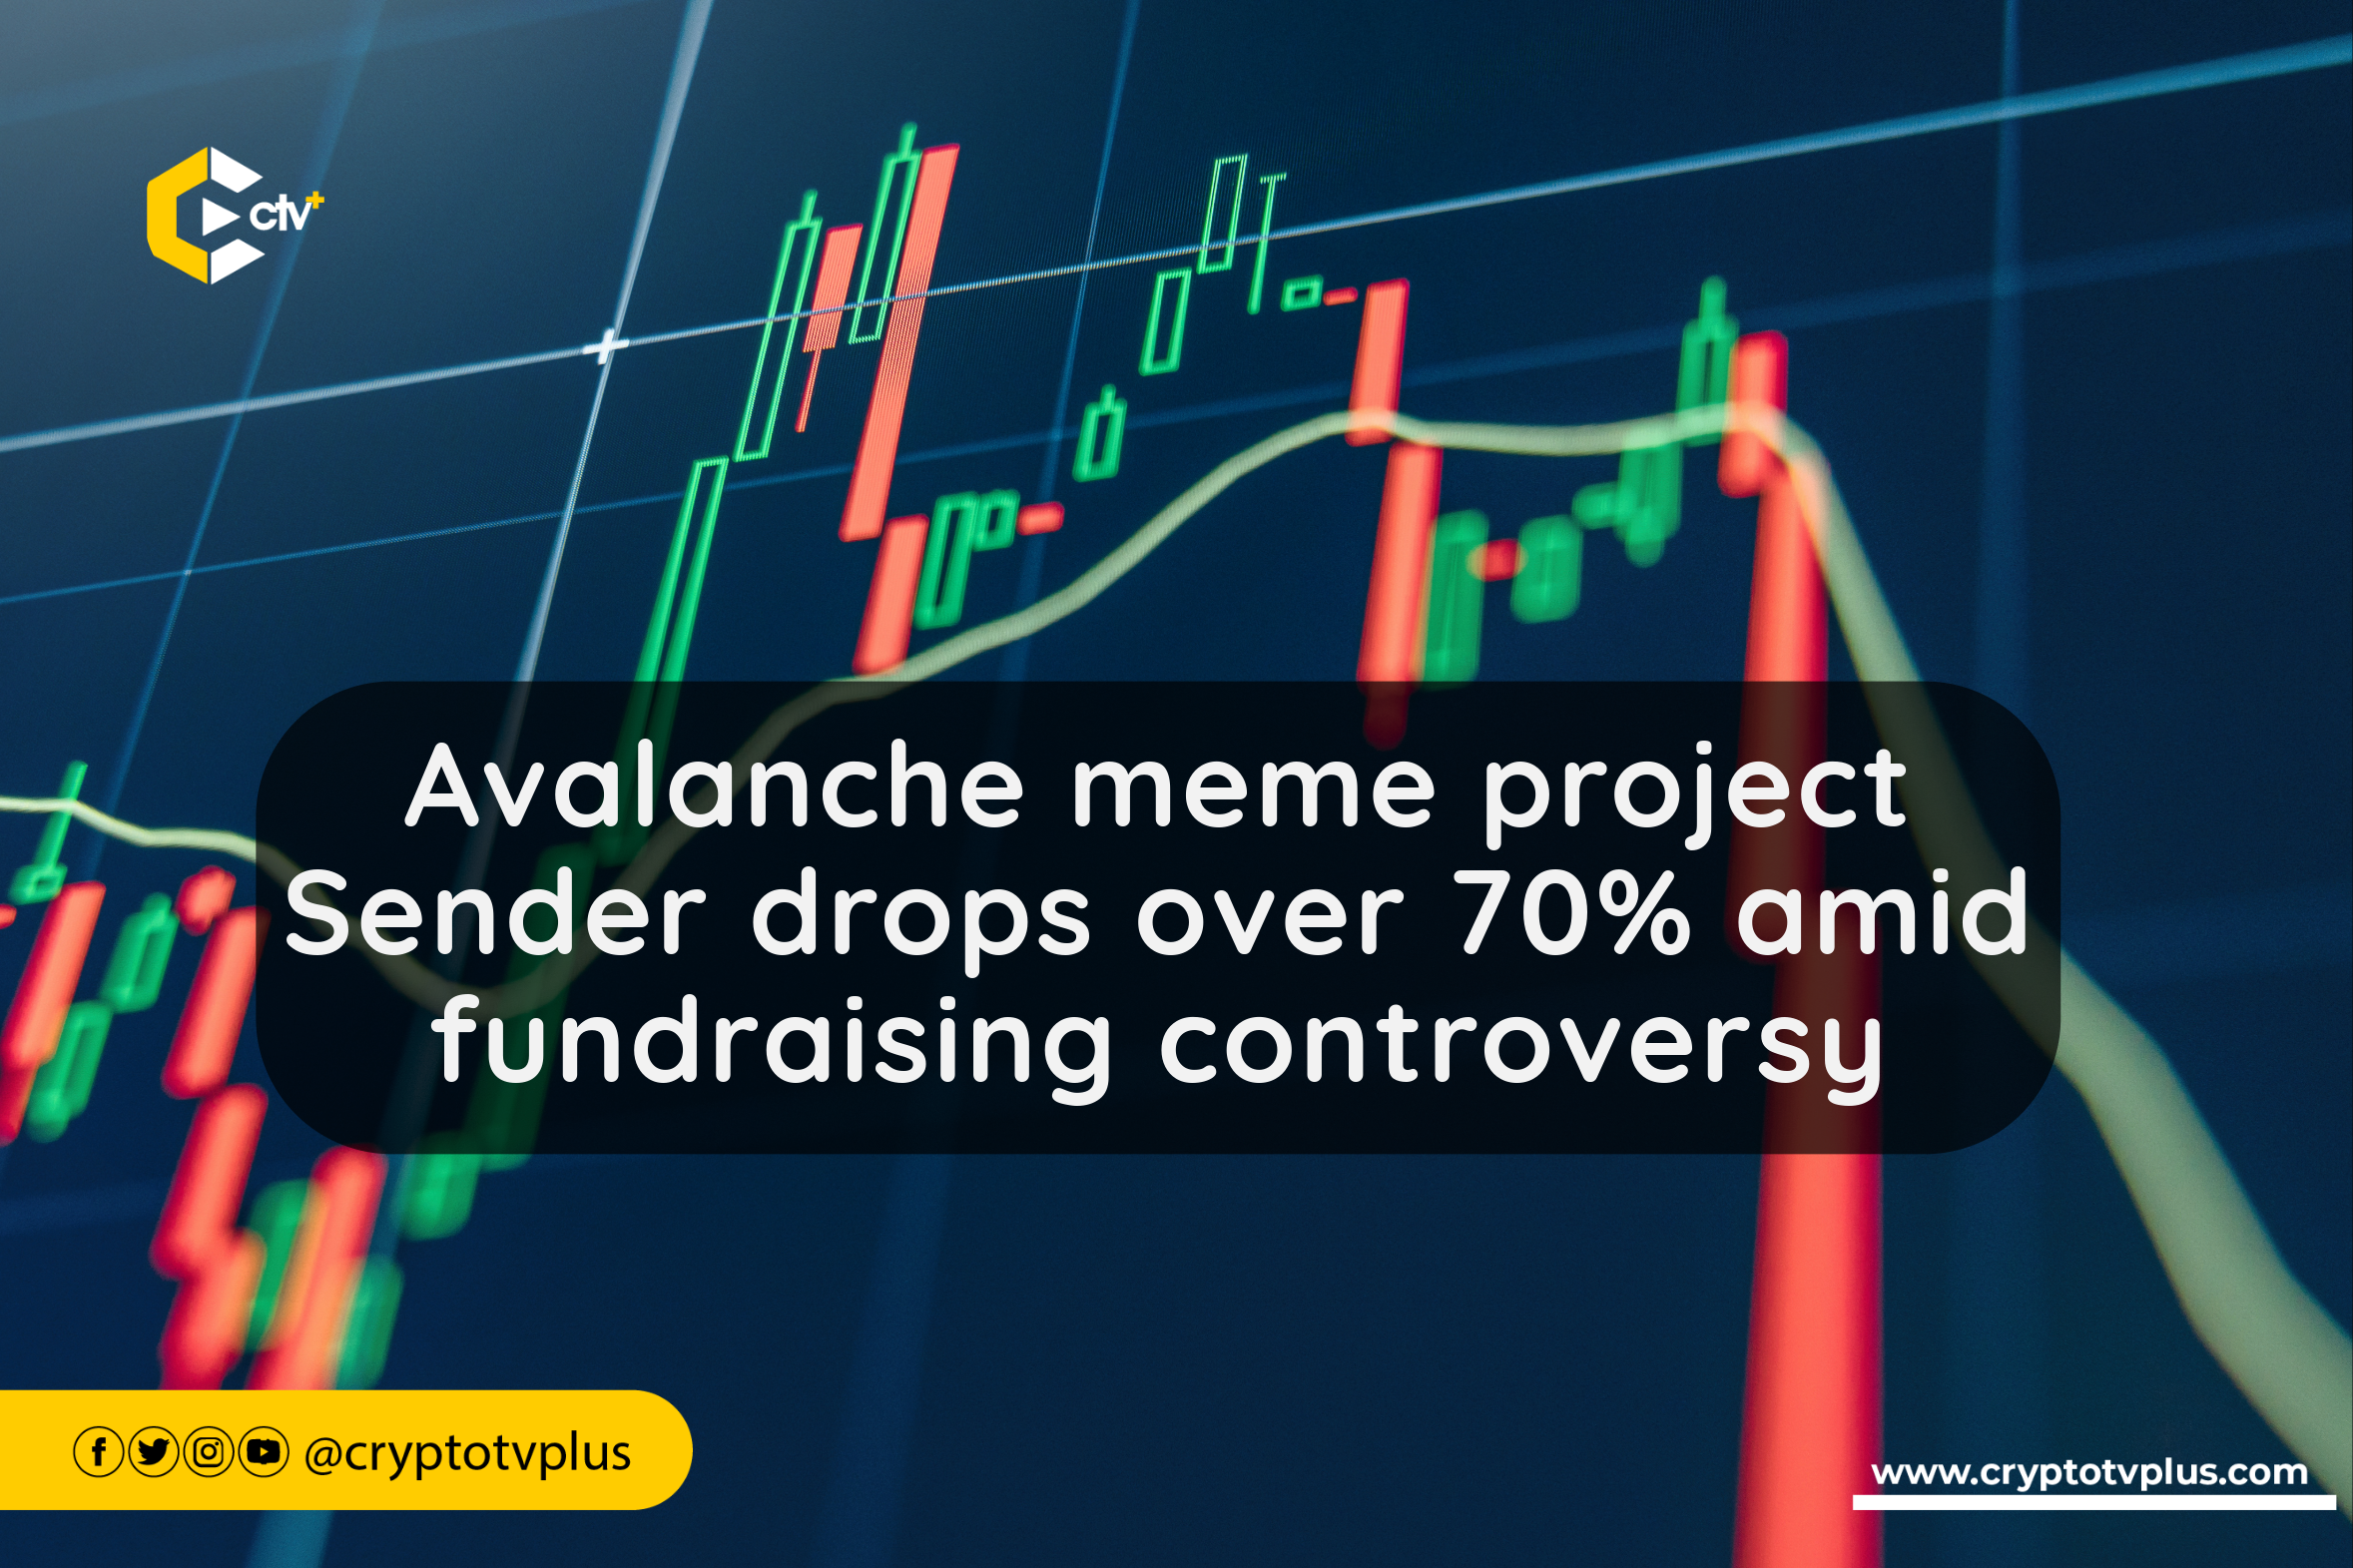 Avalanche meme project Sender drops over 70% amid fundraising controversy